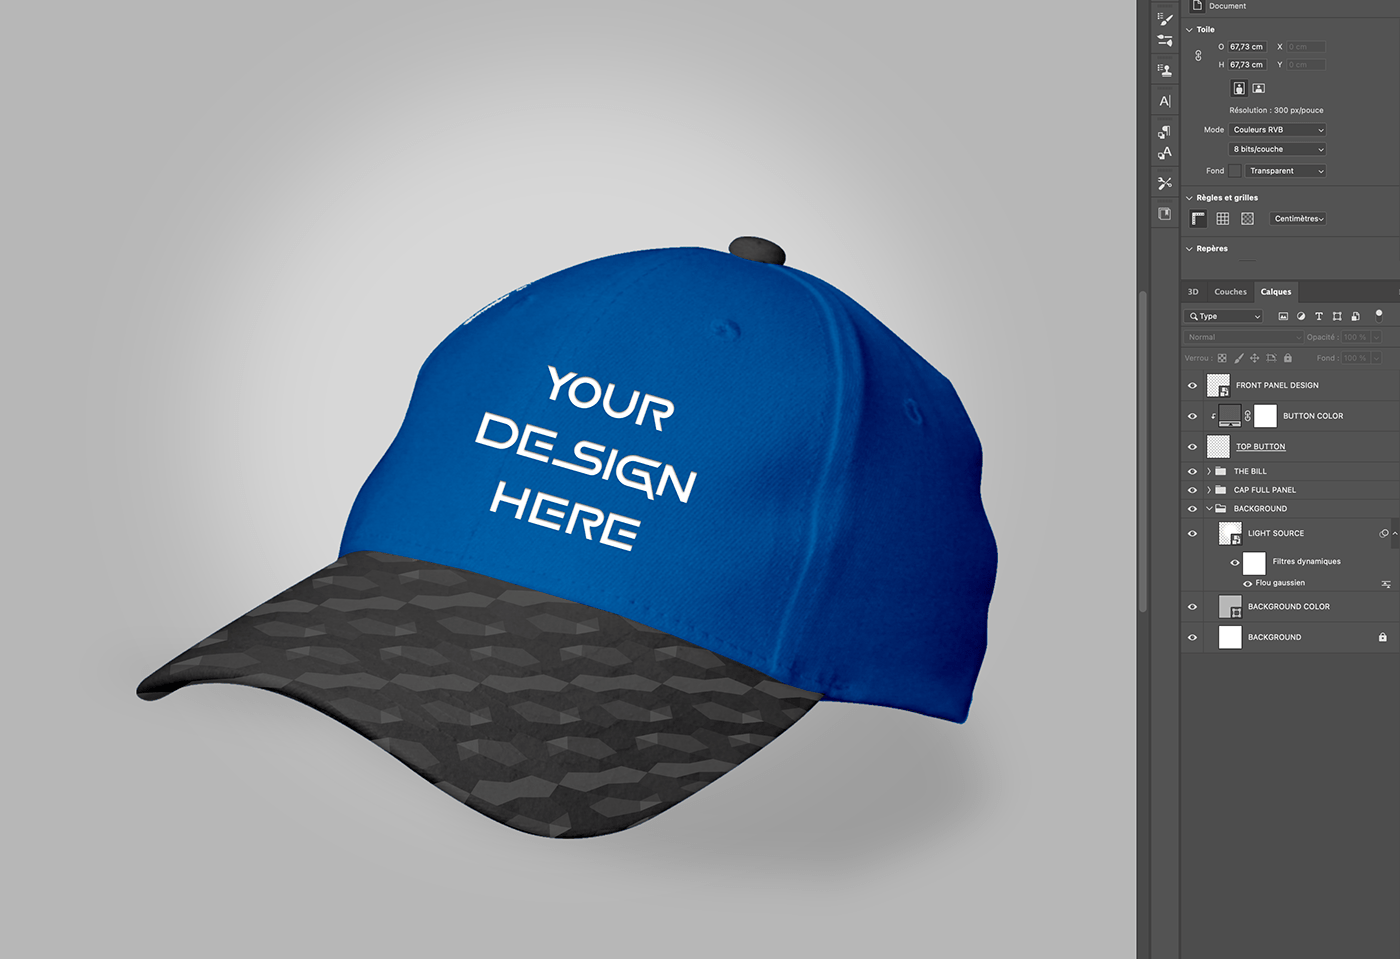 High Quality Cap Mockup PSD File Free Download